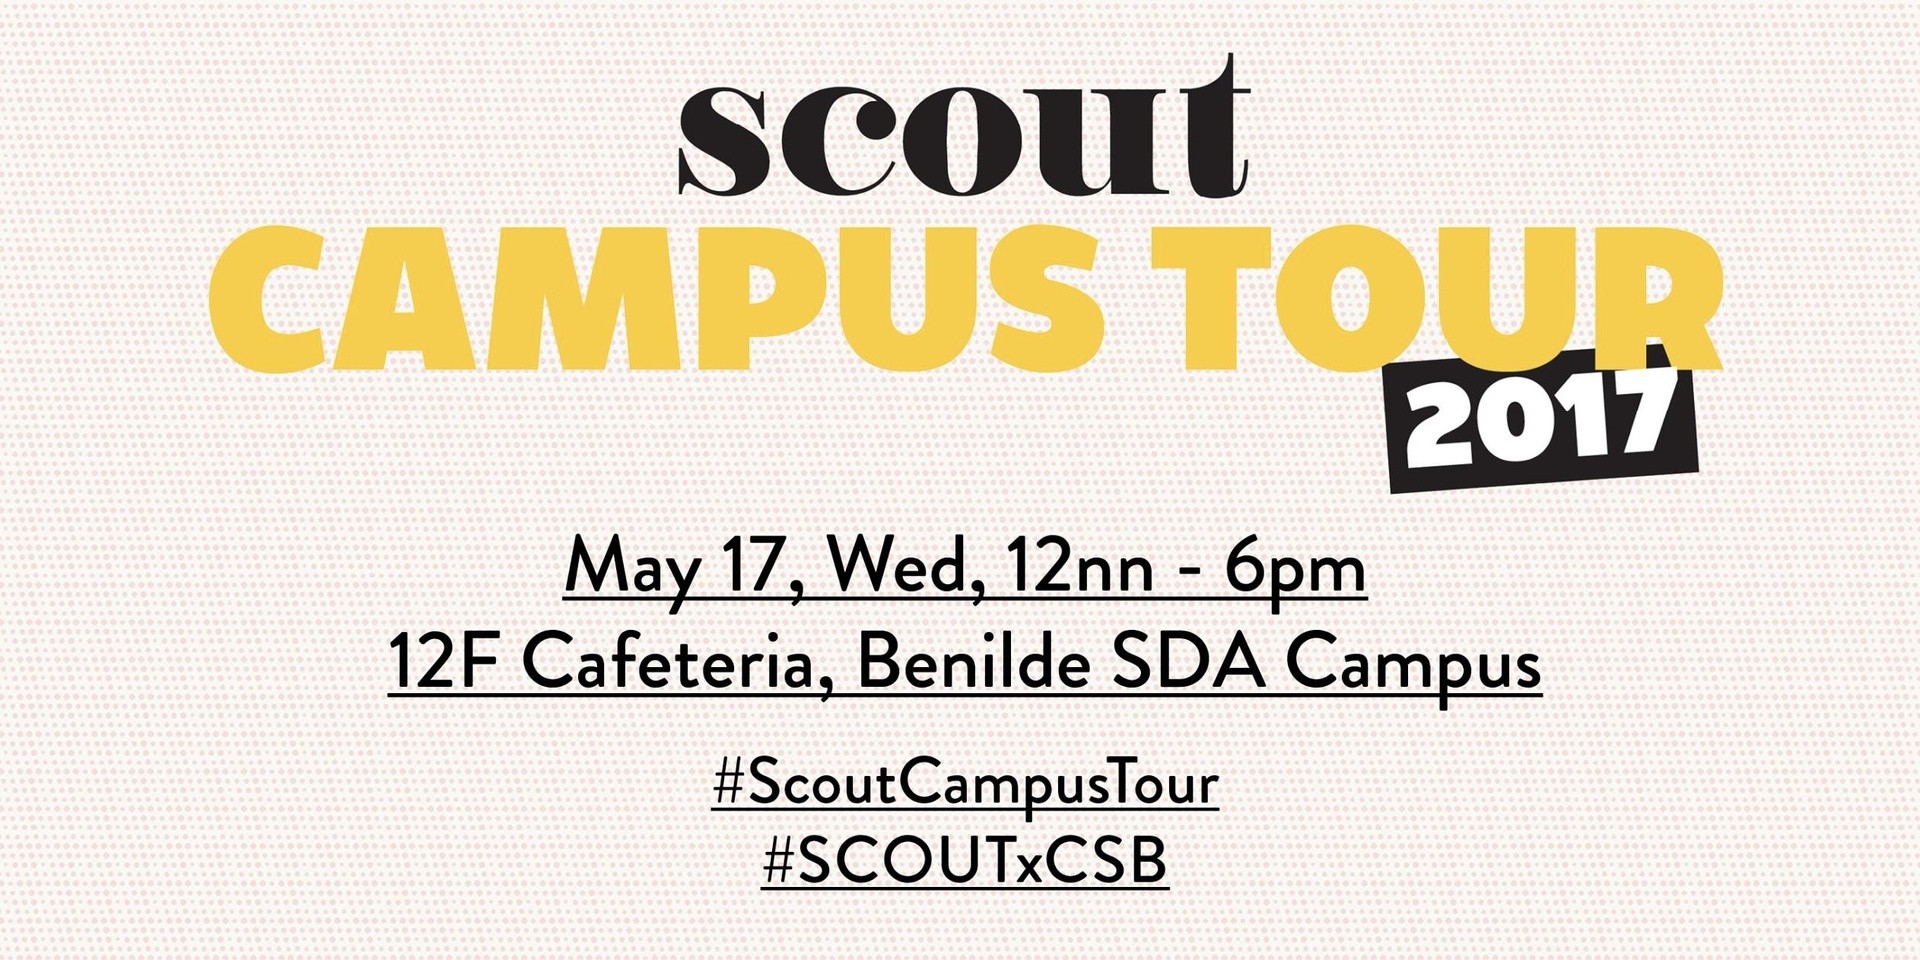 Scout Campus Tour returns to the College of Saint Benilde